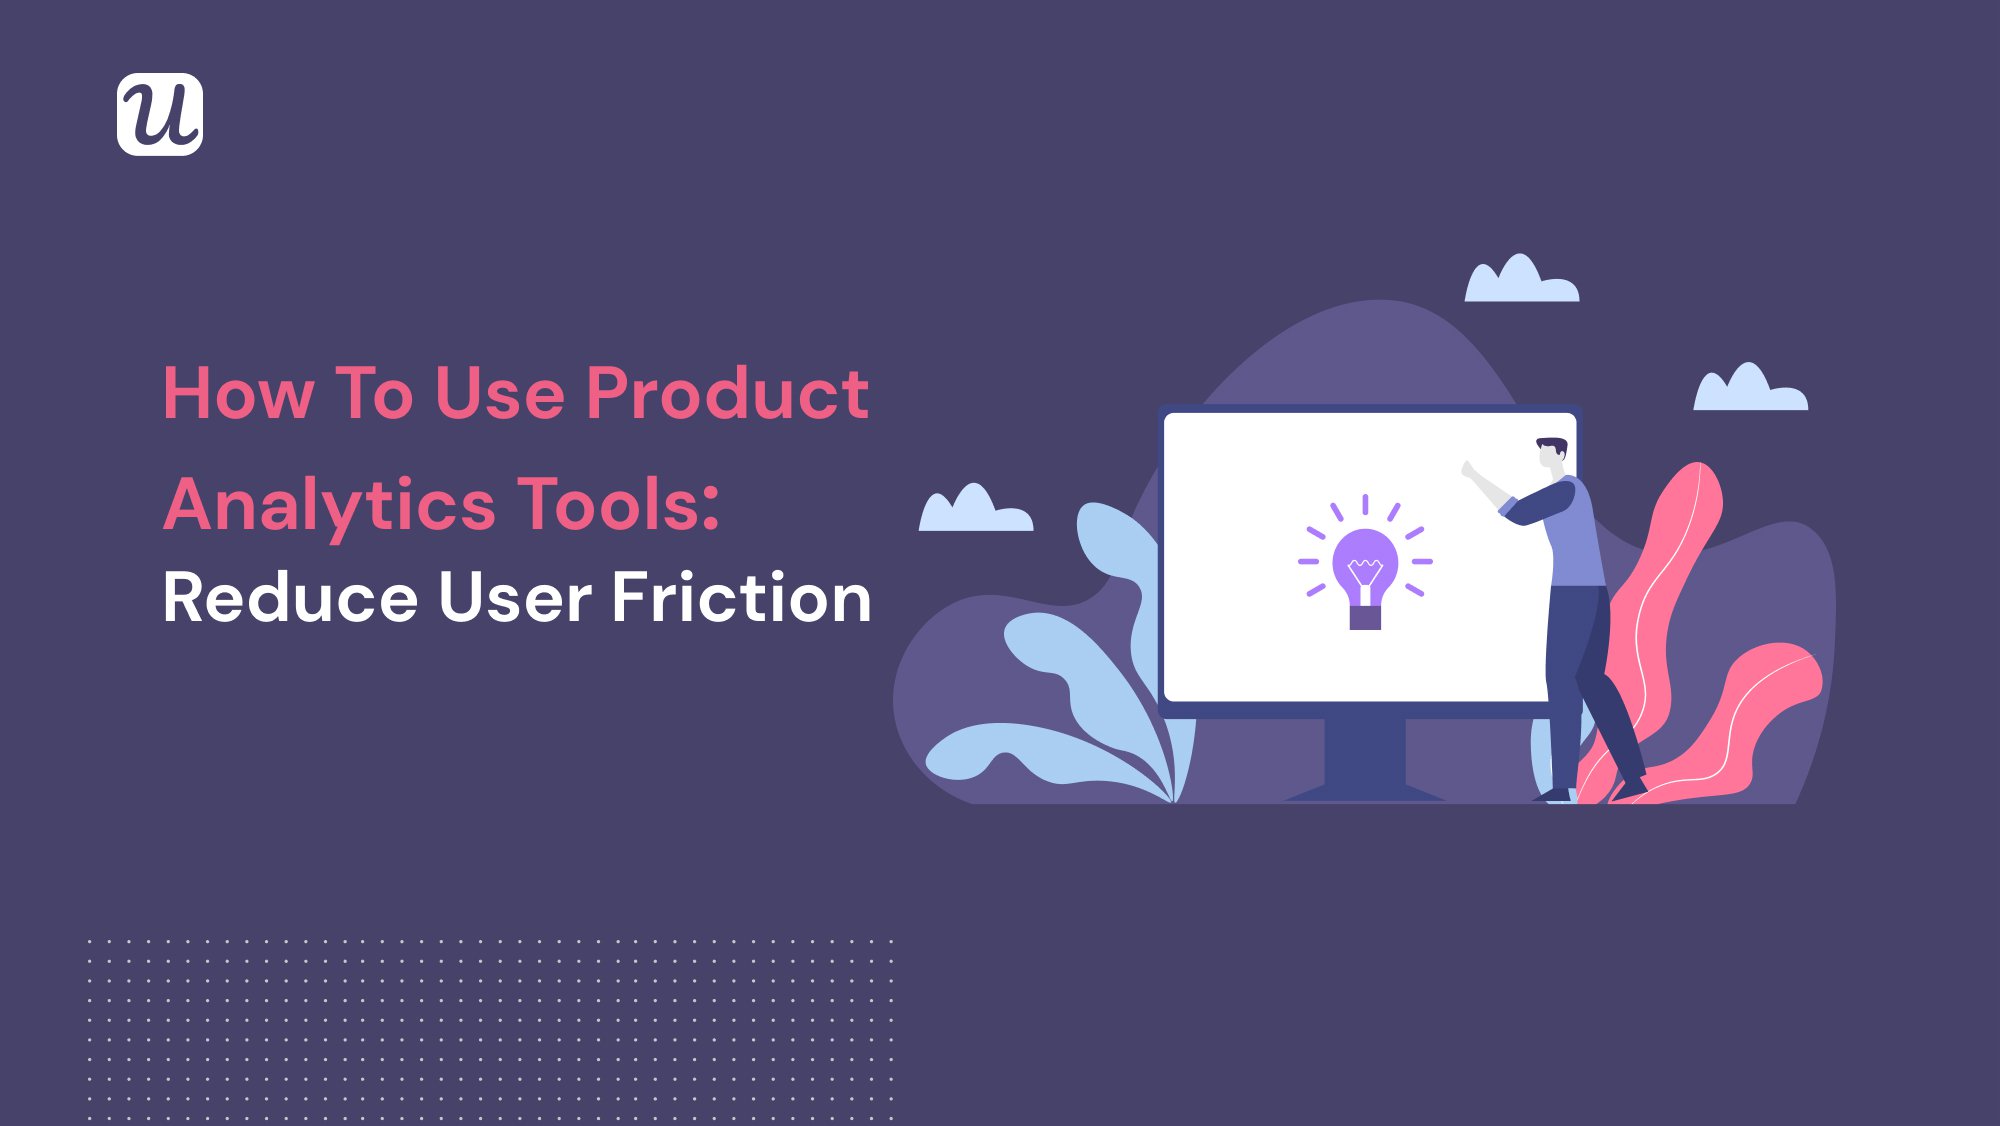 How to Use Product Analytics Tools to Reduce User Friction